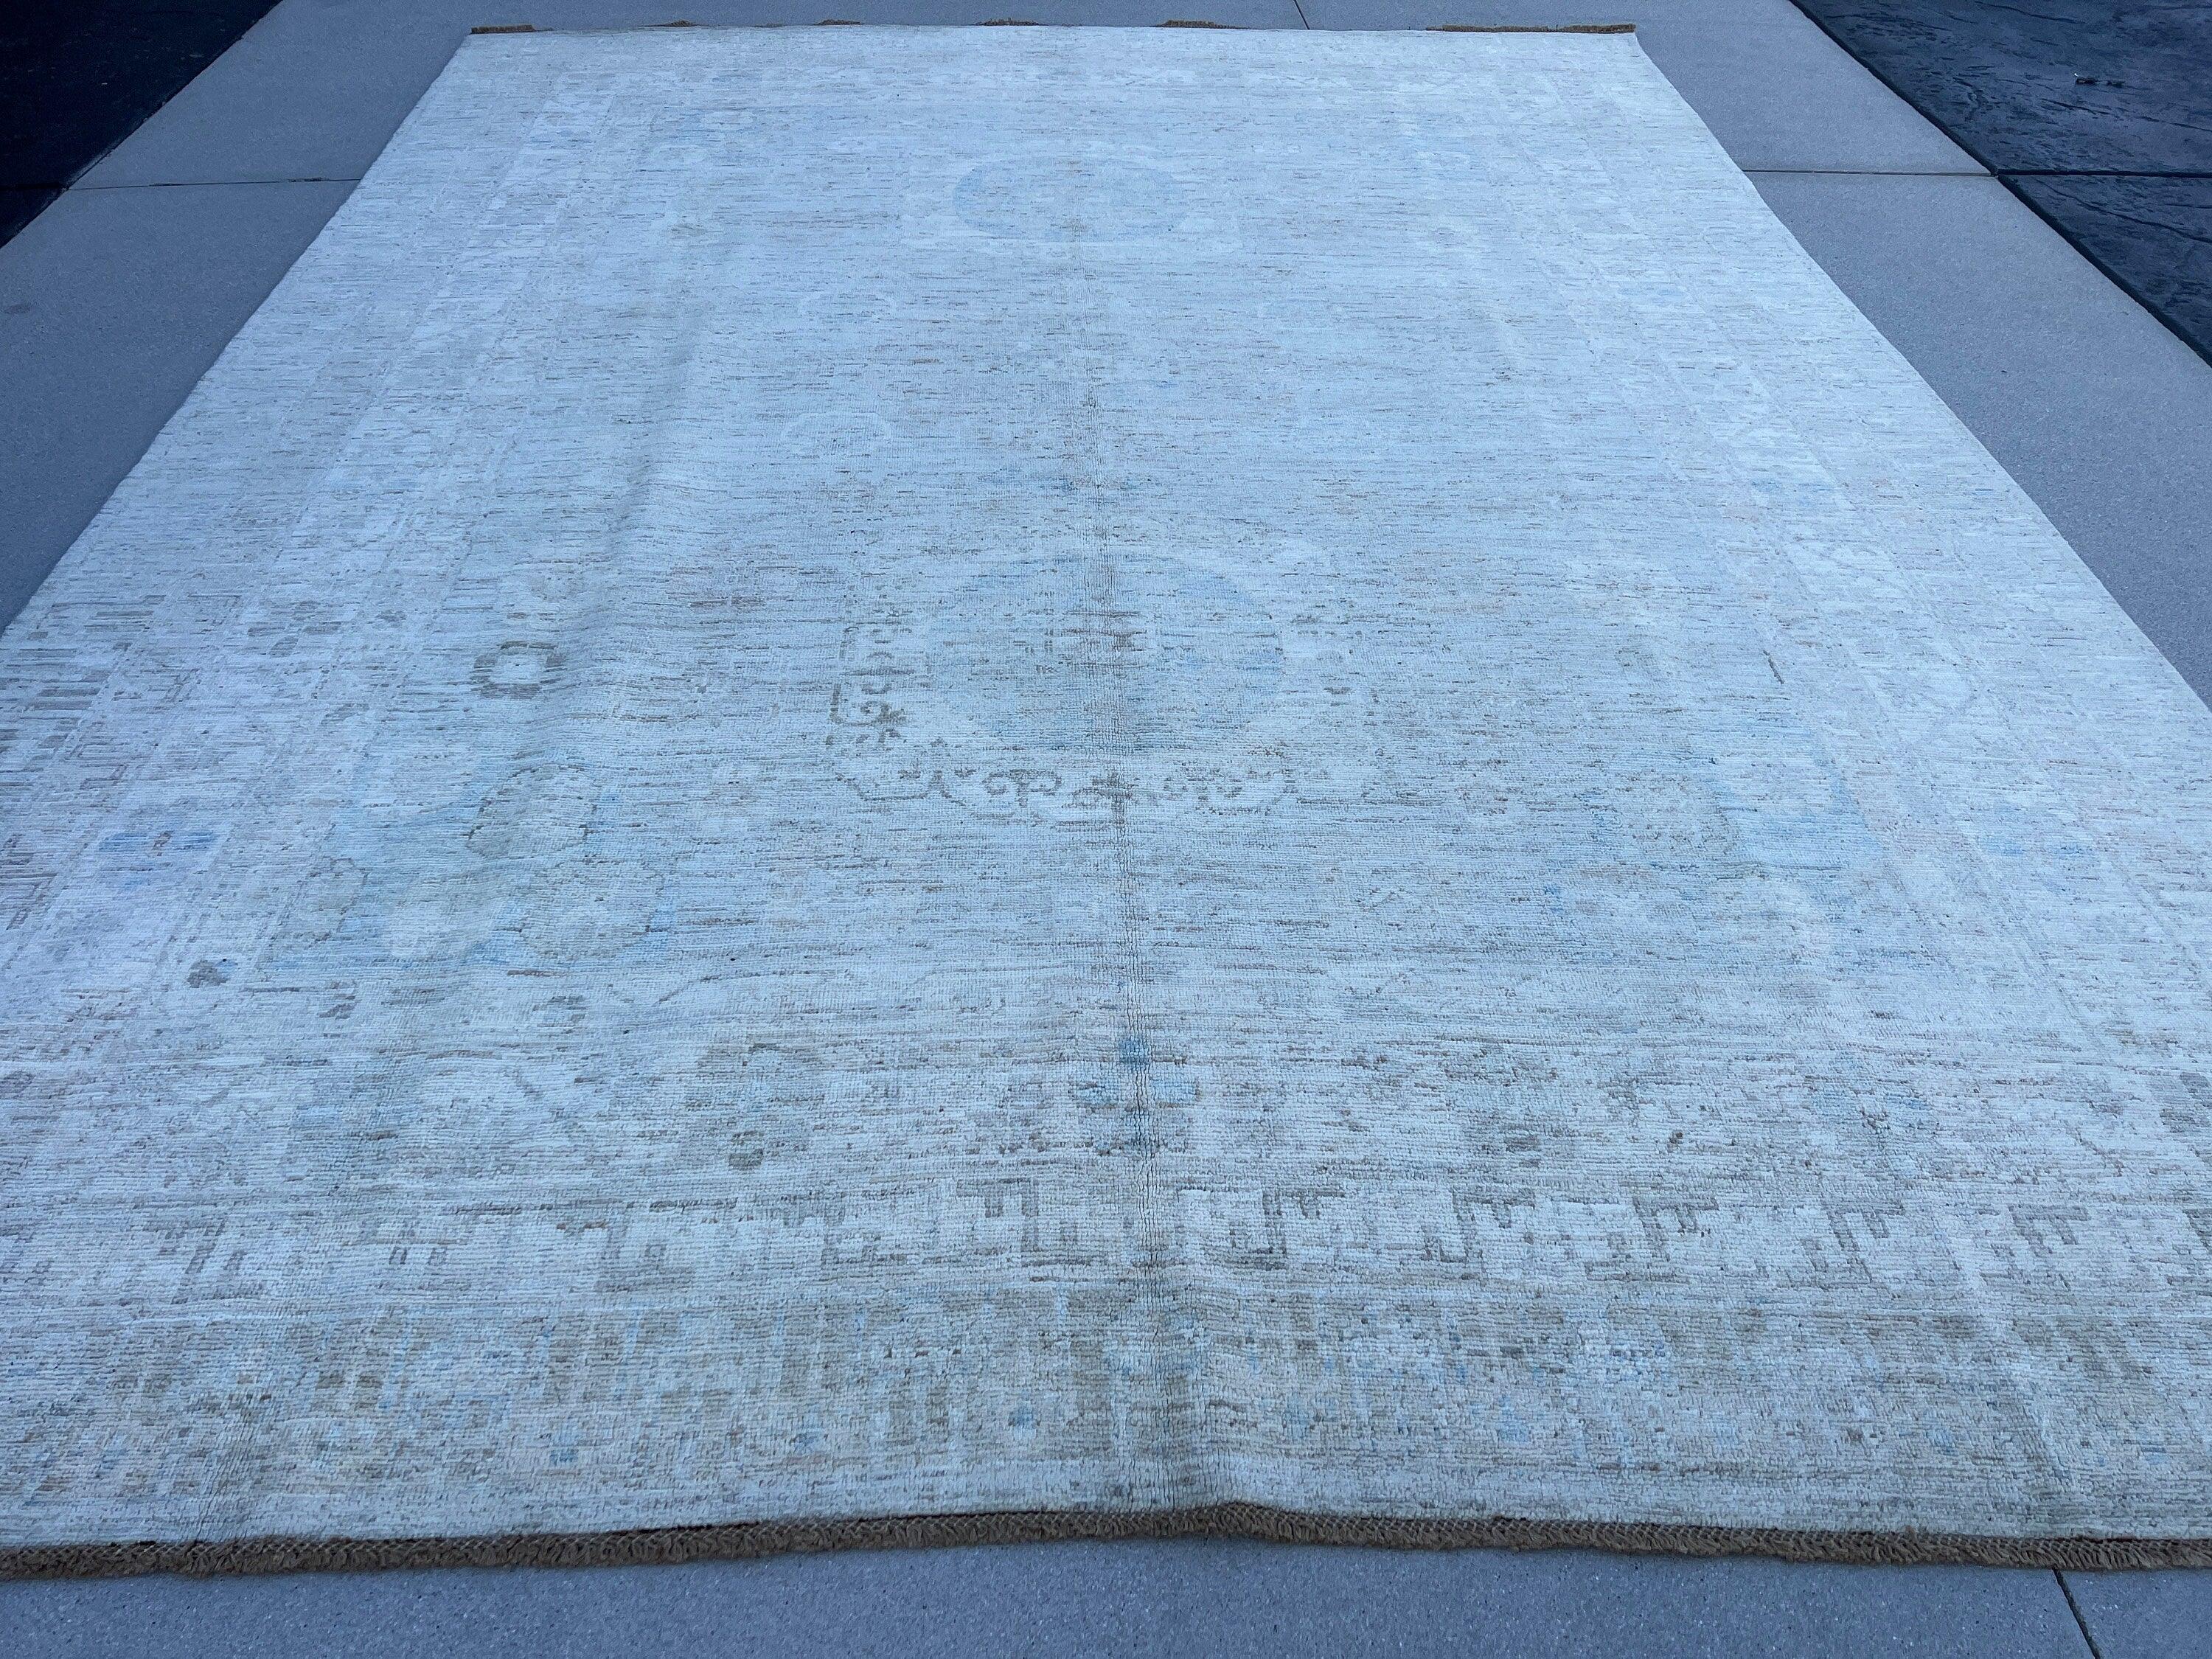 9x12 (270x365) Handmade Afghan Rug | Muted Neutral Grey Sky Baby Blue Teal Tan Cream Beige | Turkish Floral Persian Hand Knotted Wool